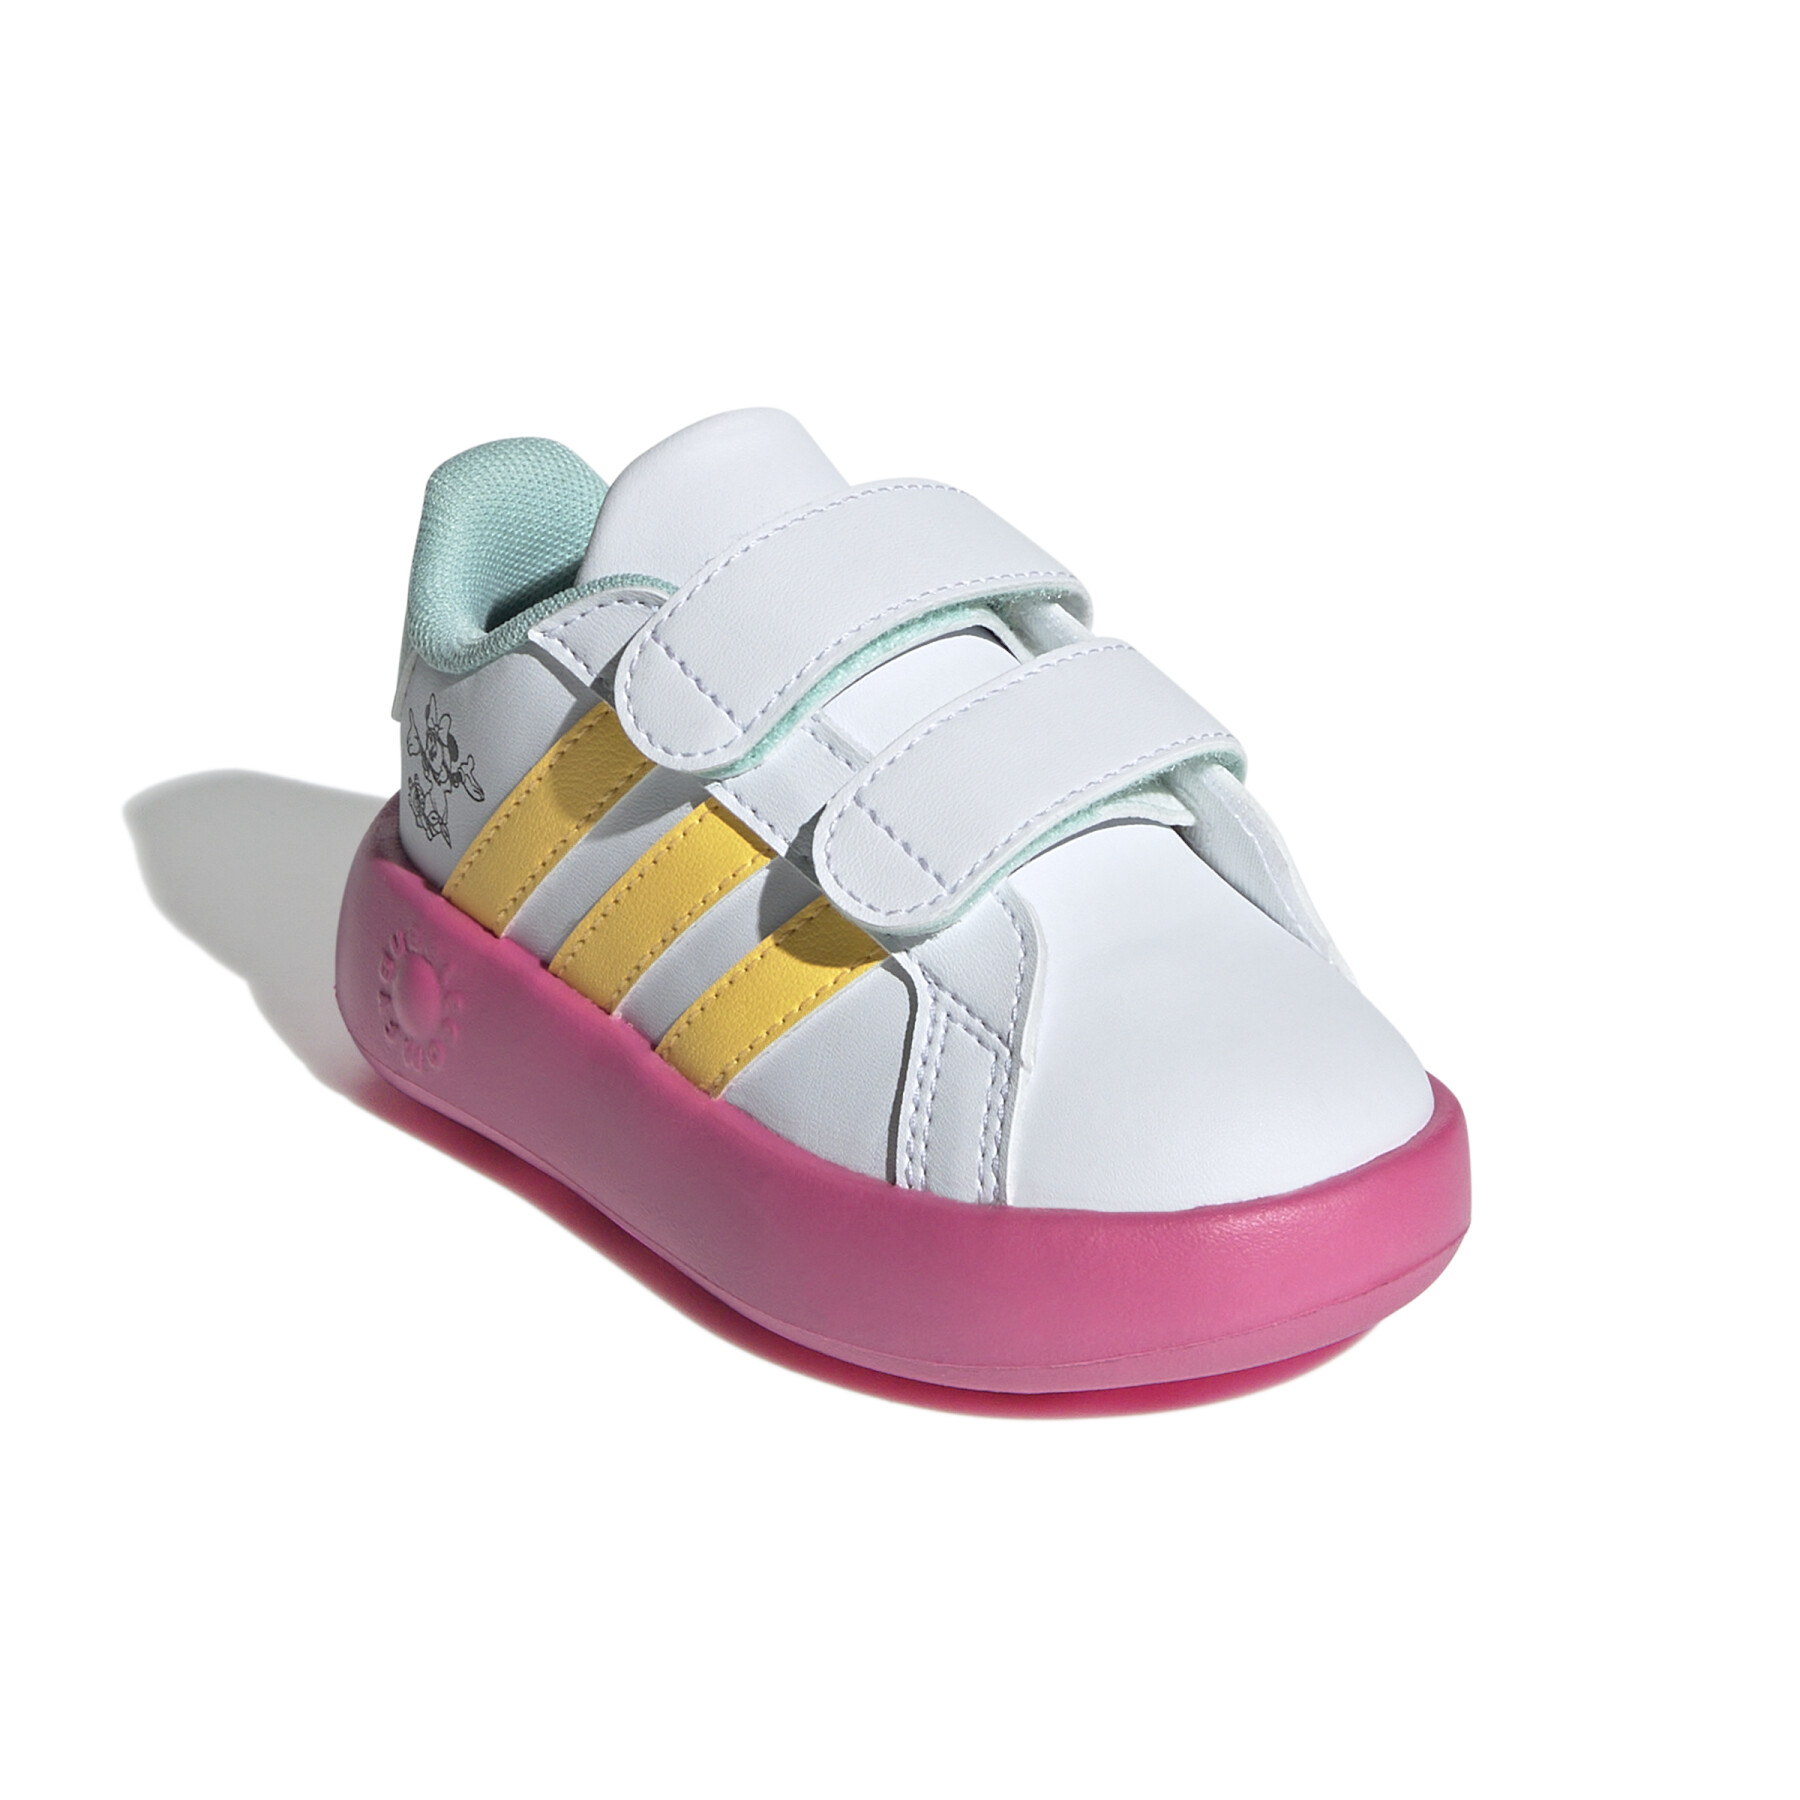 Baby sneakers adidas Grand Court Minnie CF